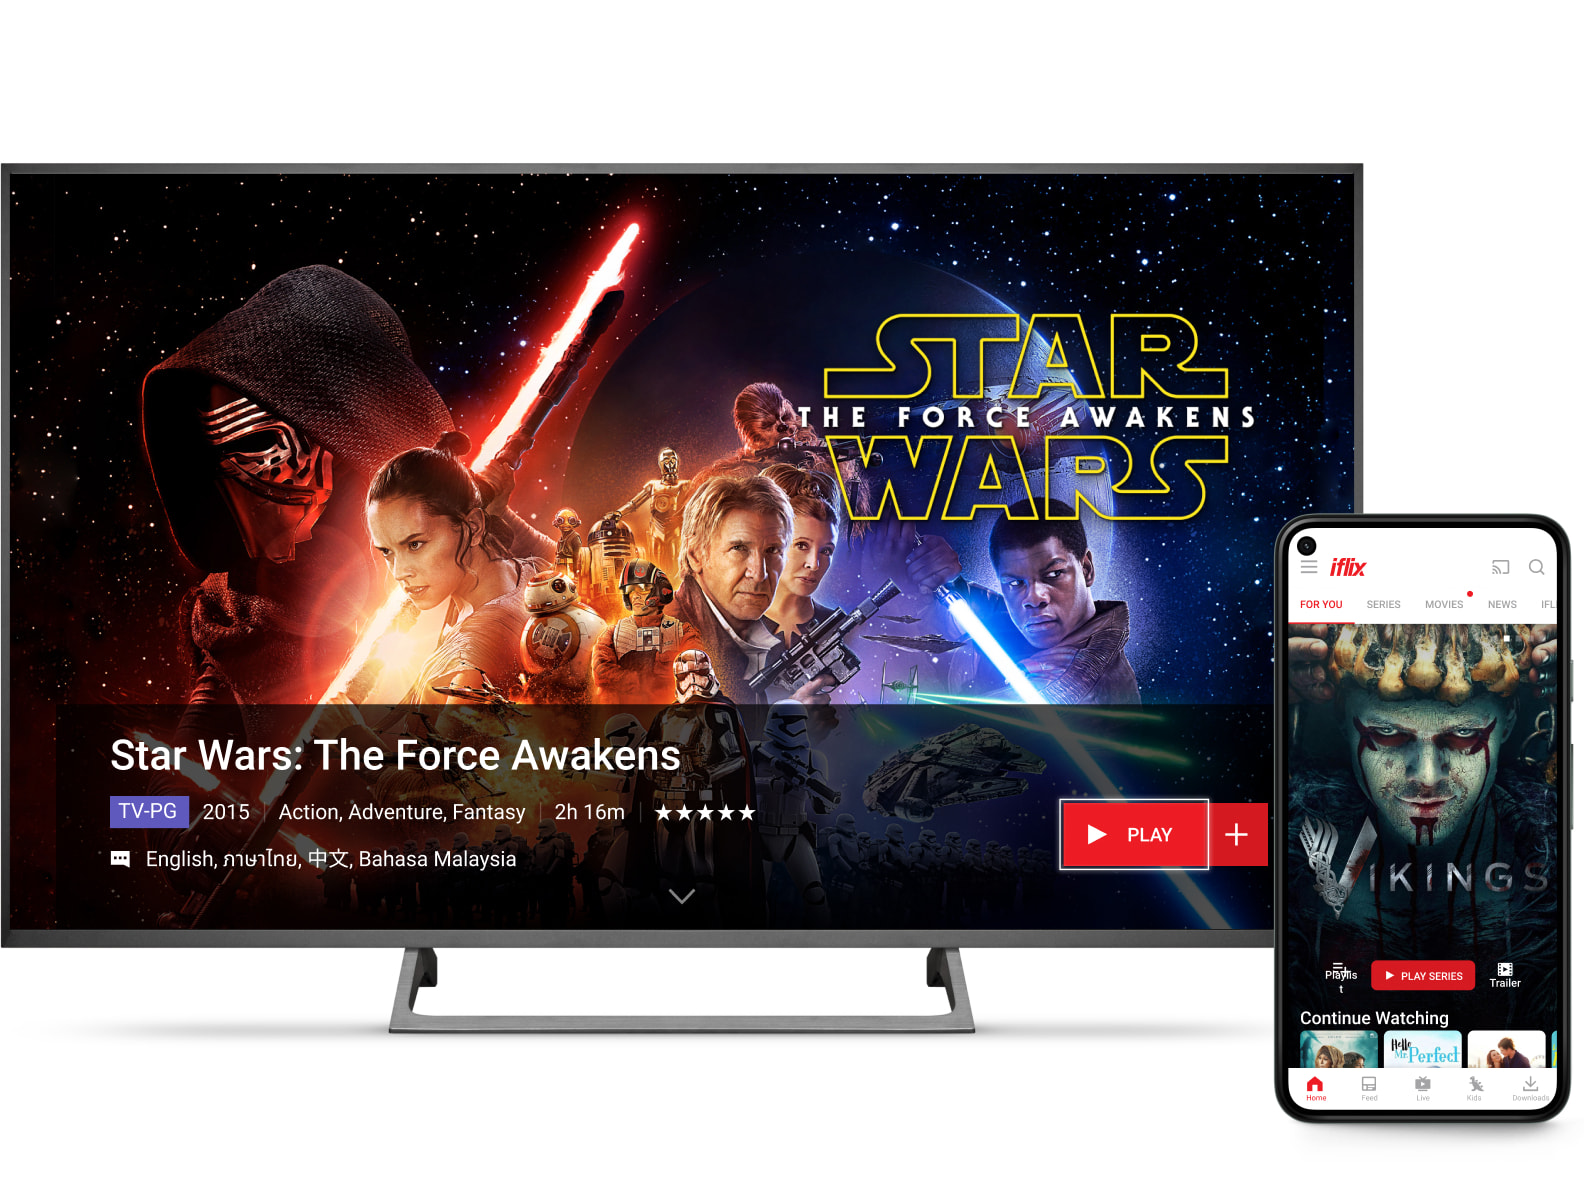 iflix 2.5 Android TV app and iflix 3.0 Android mobile app.